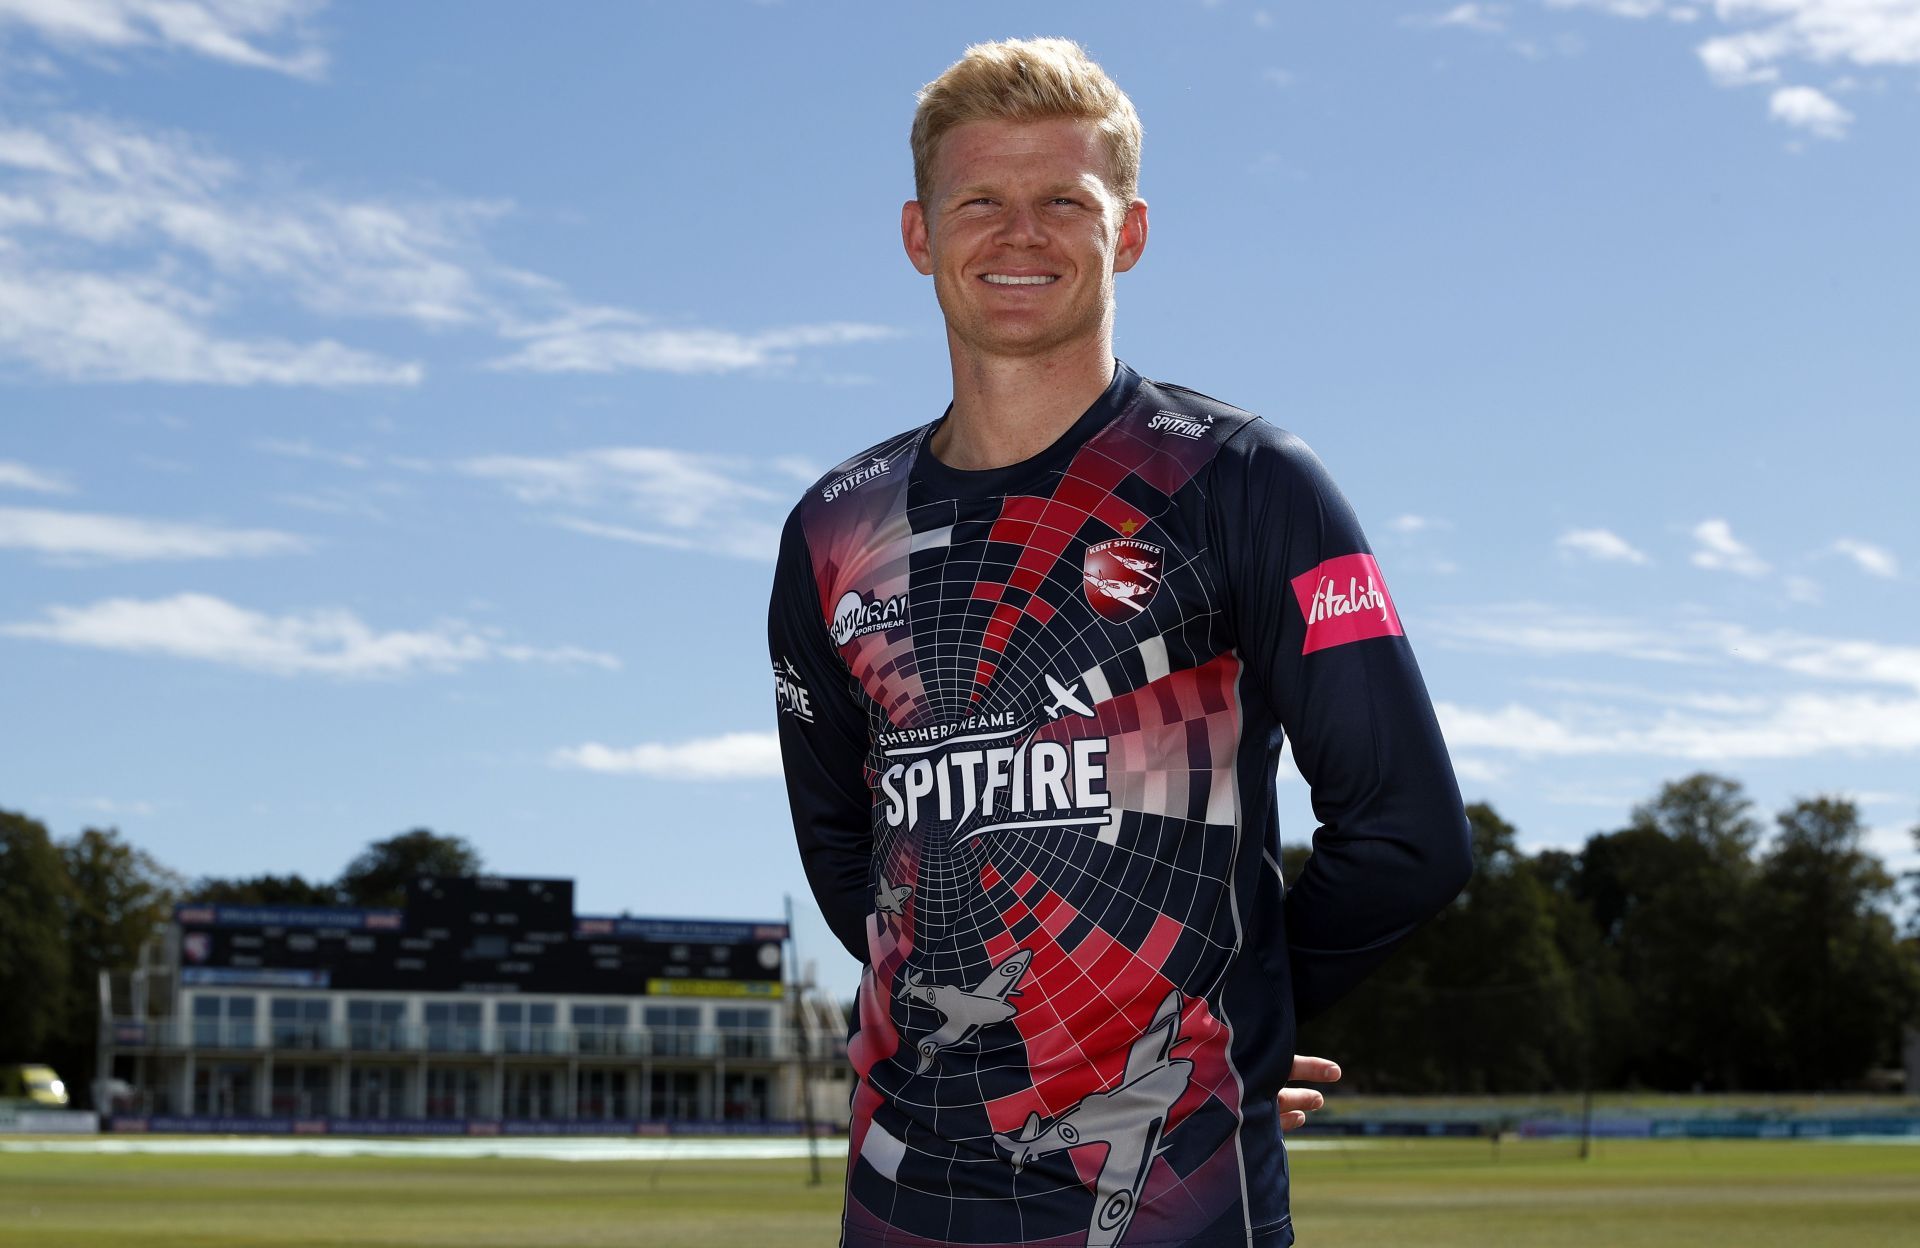 Sam Billings has played 215 T20 matches in his career (PC: Getty Images)